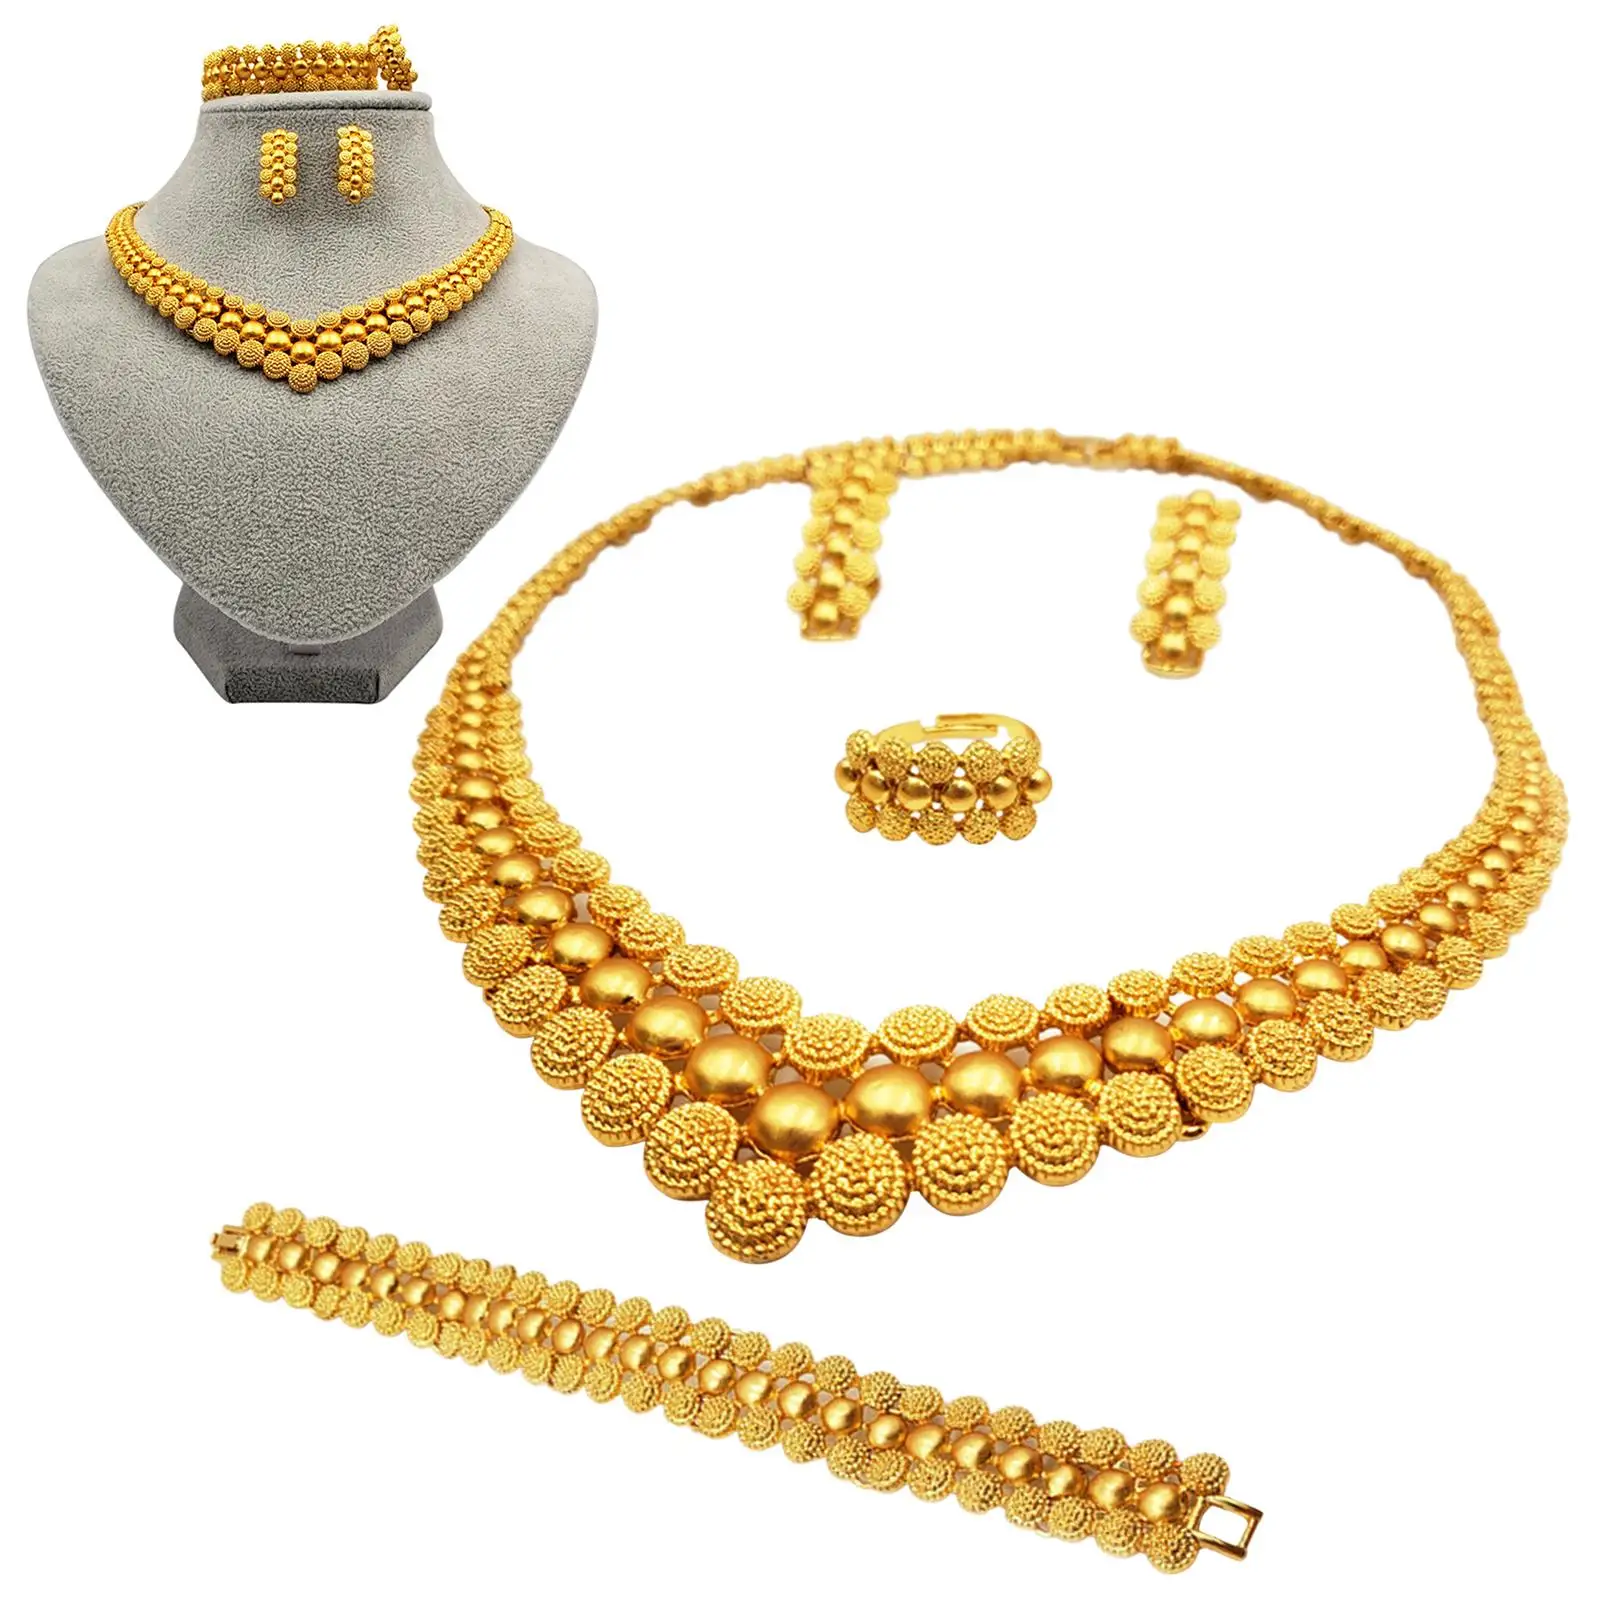 Nigeria Gold Color Jewelry Set Choker Elegant Necklace for Eastern Bridal